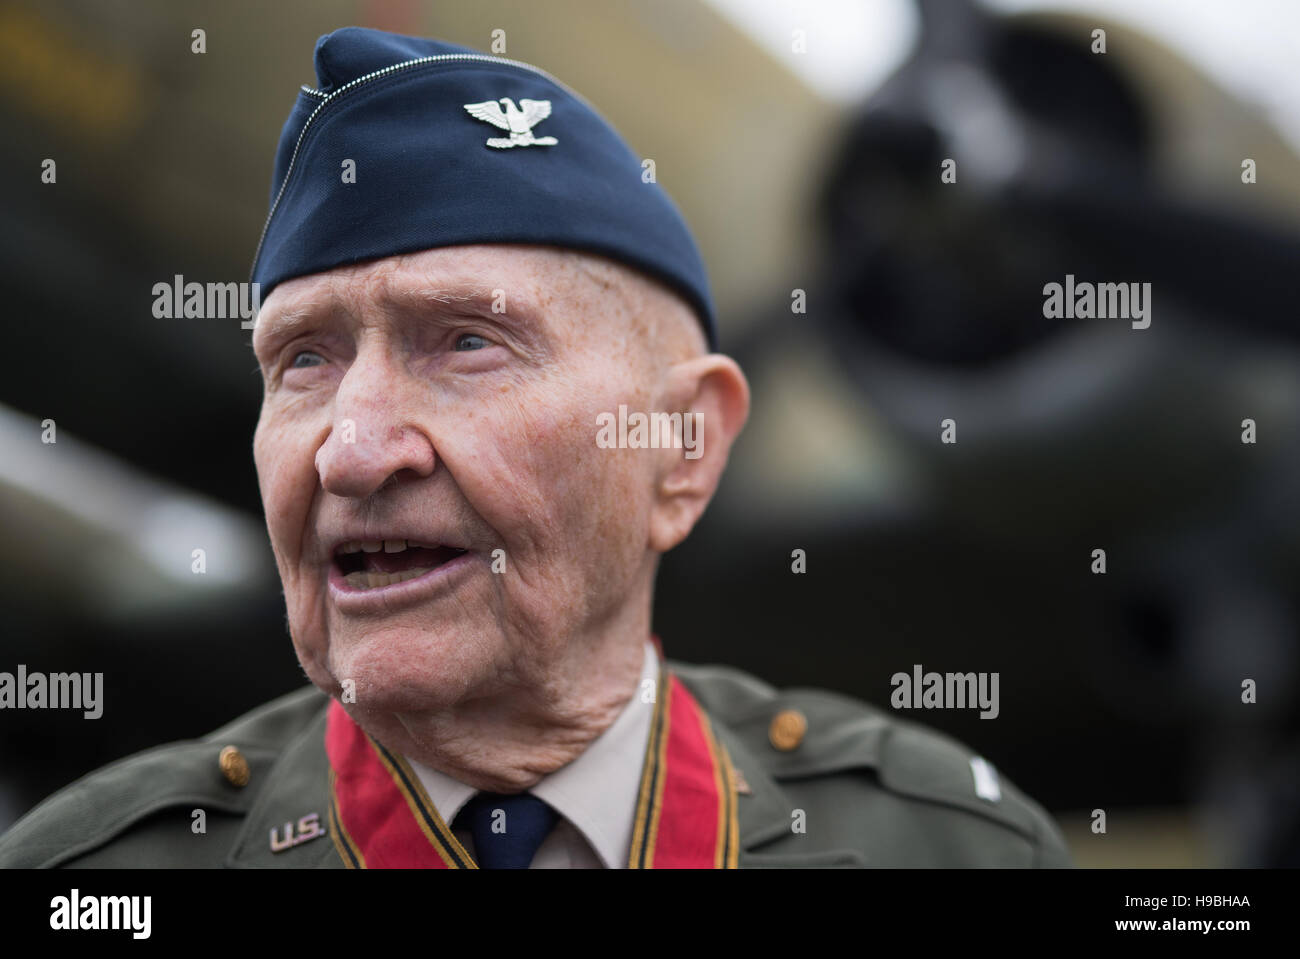 Gail Halvorsen, known as 'Candy bomber pilot' (in German 'Rosinenbomber'), stands in front of a historical plane of the same type the former US-pilot used for the 'Luftbruecke' (lit. 'air bridge') over Berlin after World War II in Frankfurt/Main, Germany, 21 November 2016. PHOTO: BORIS ROESSLER/dpa Stock Photo